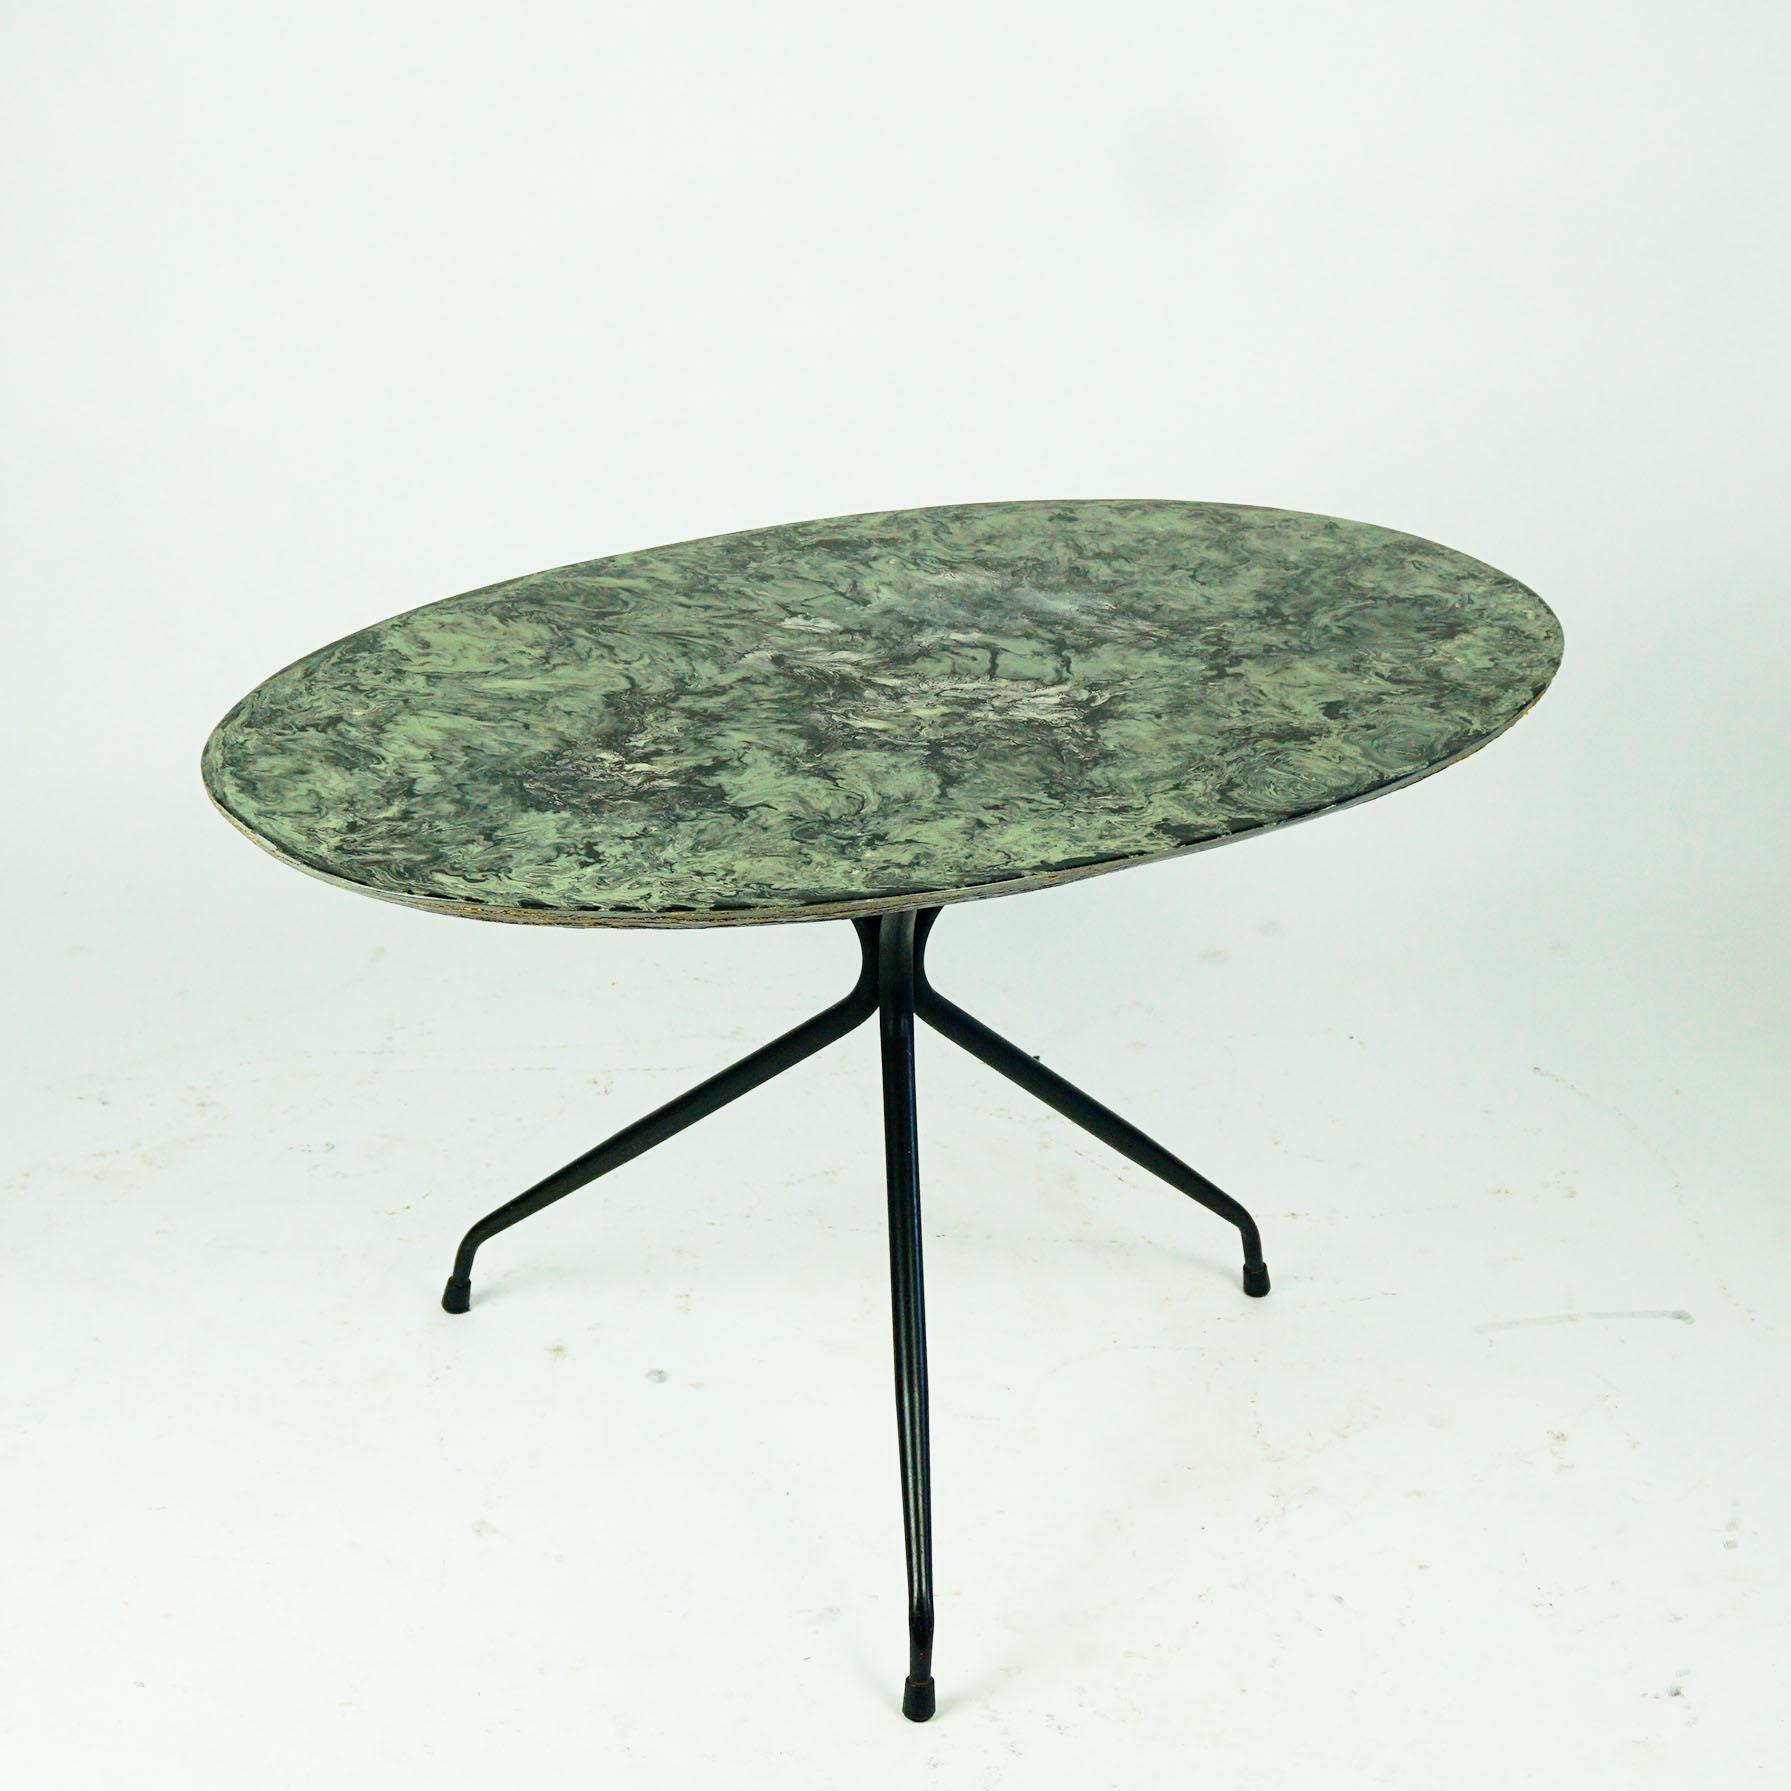 This charming small midcentury coffee or cocktail table has been designed and manufactured in italy 1950s.
It features a black lacquered metal tripod base with an oval faux marble top made of wood. Very elegant proportions, rubber shoes at the end